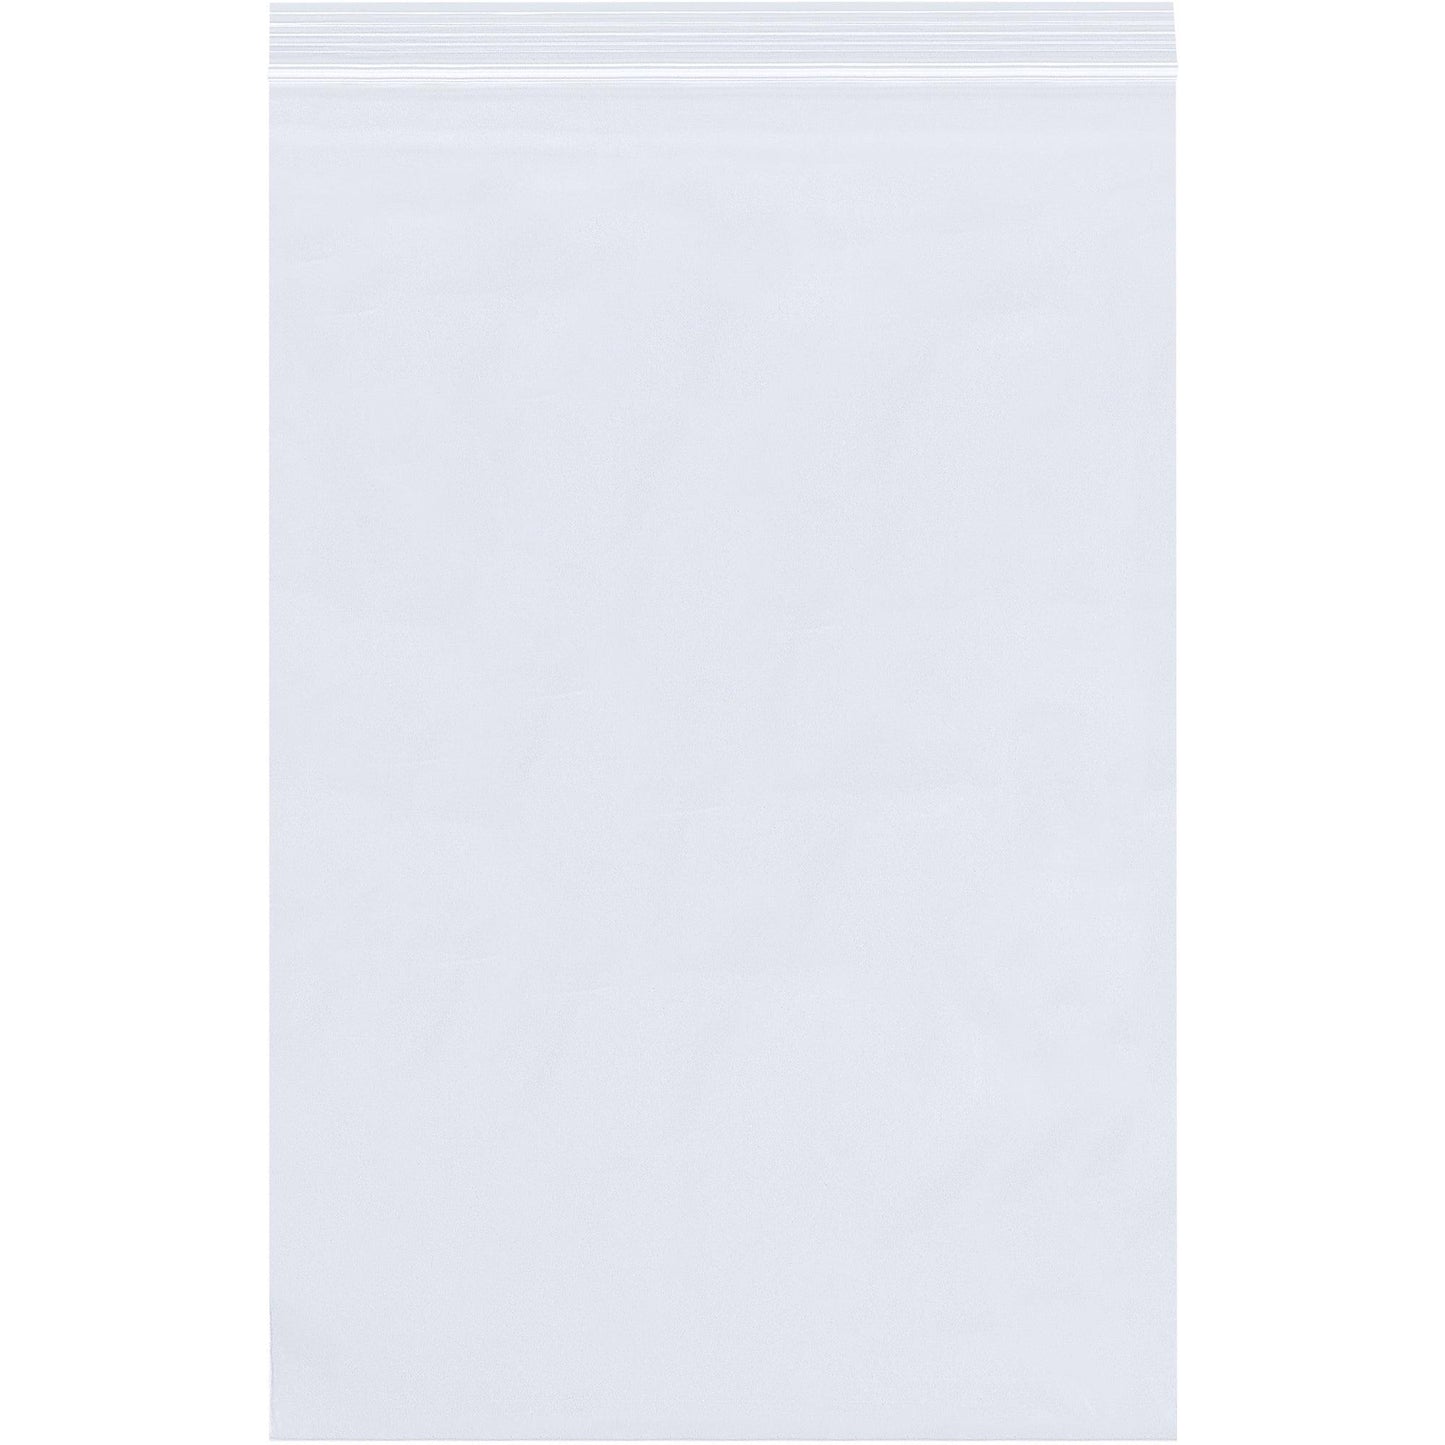 20 x 24" - 6 Mil Reclosable Poly Bags - PB3907